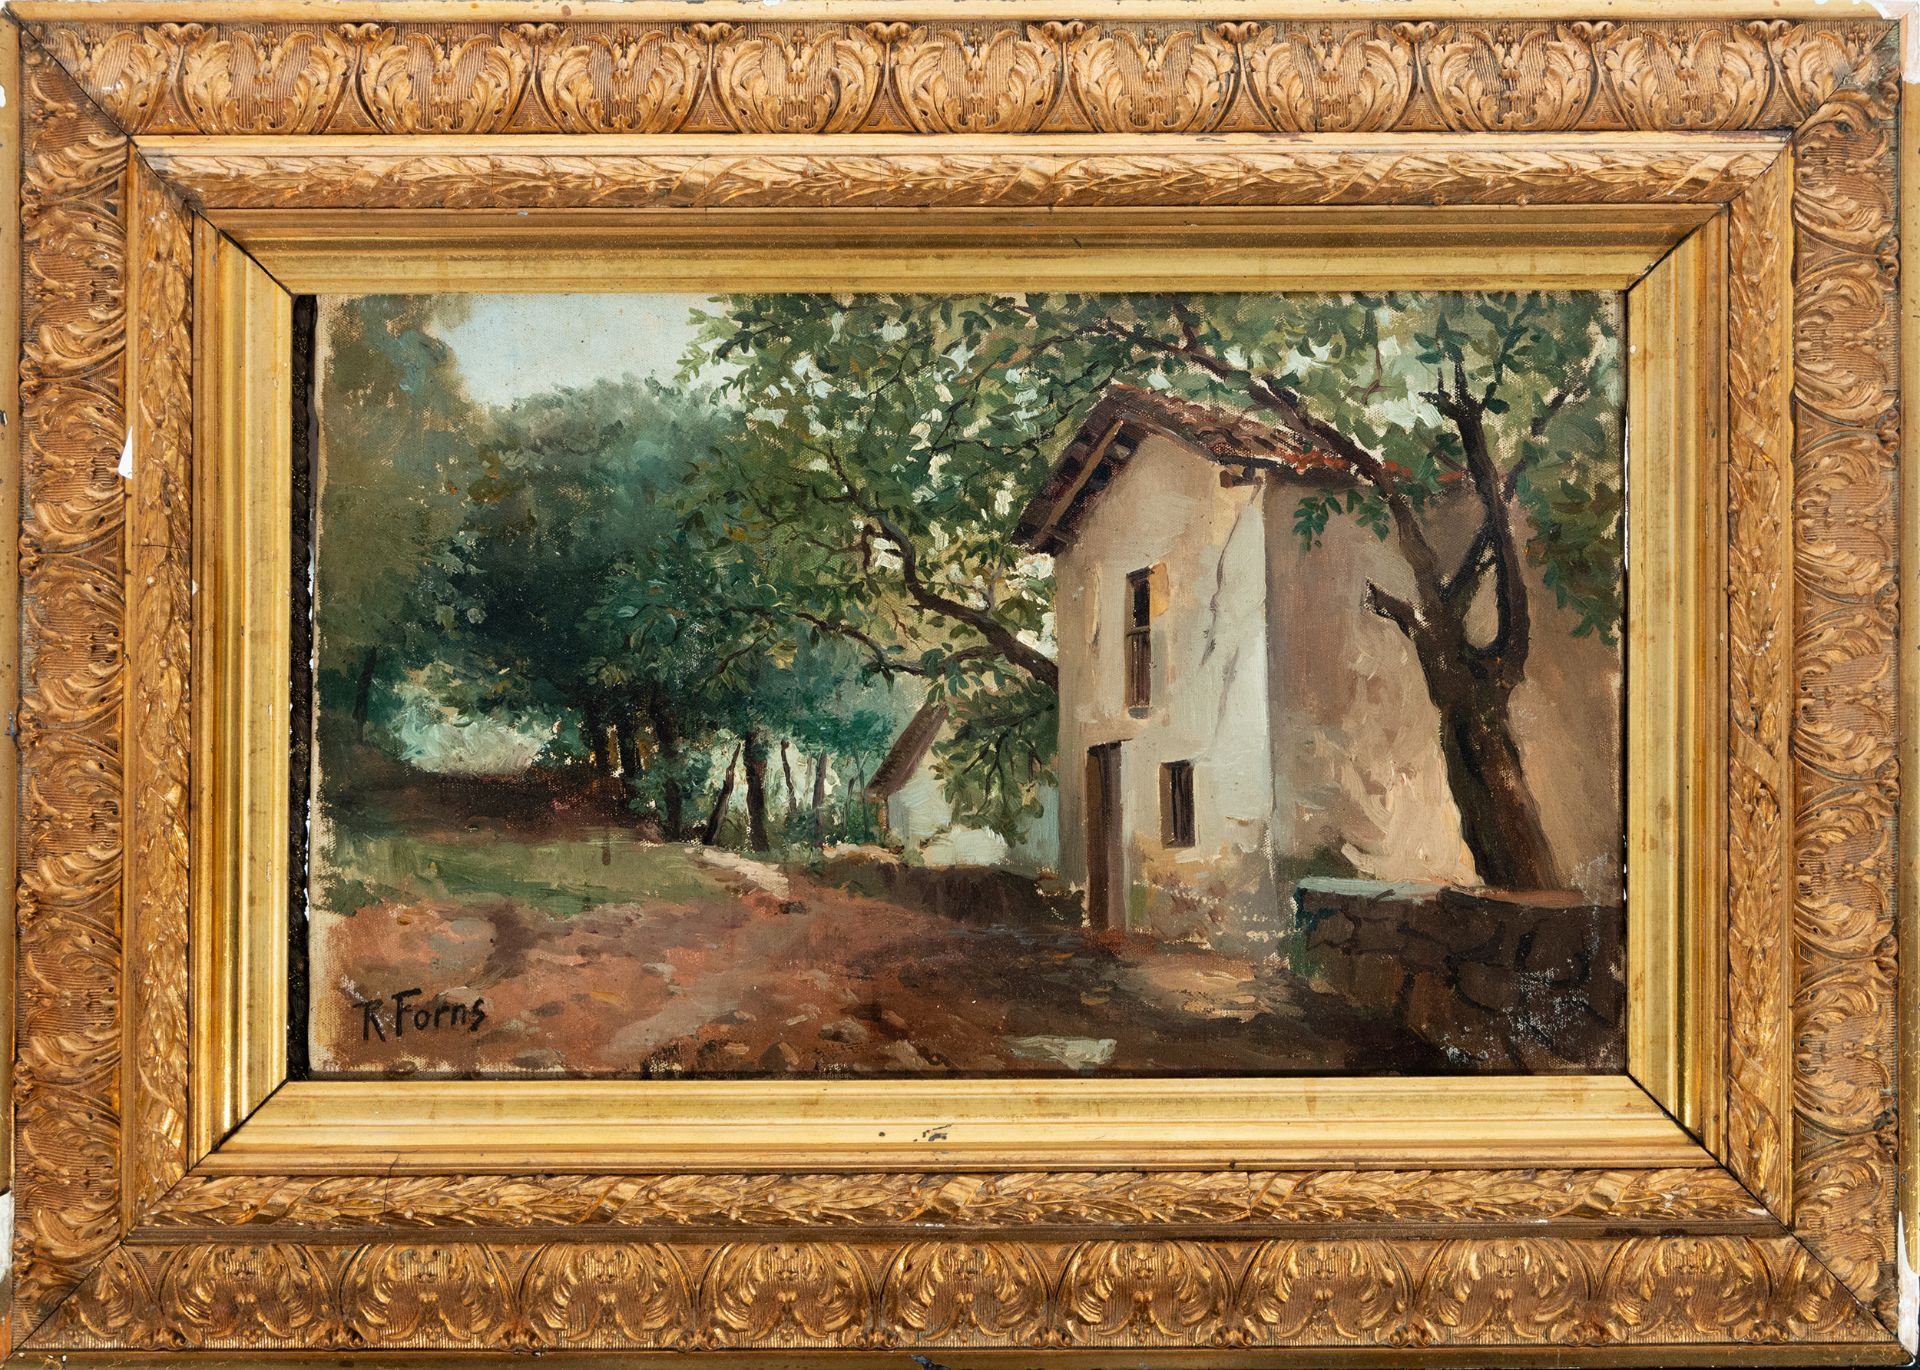 View of House in the Countryside, signed Forns, Spanish school of the 20th century